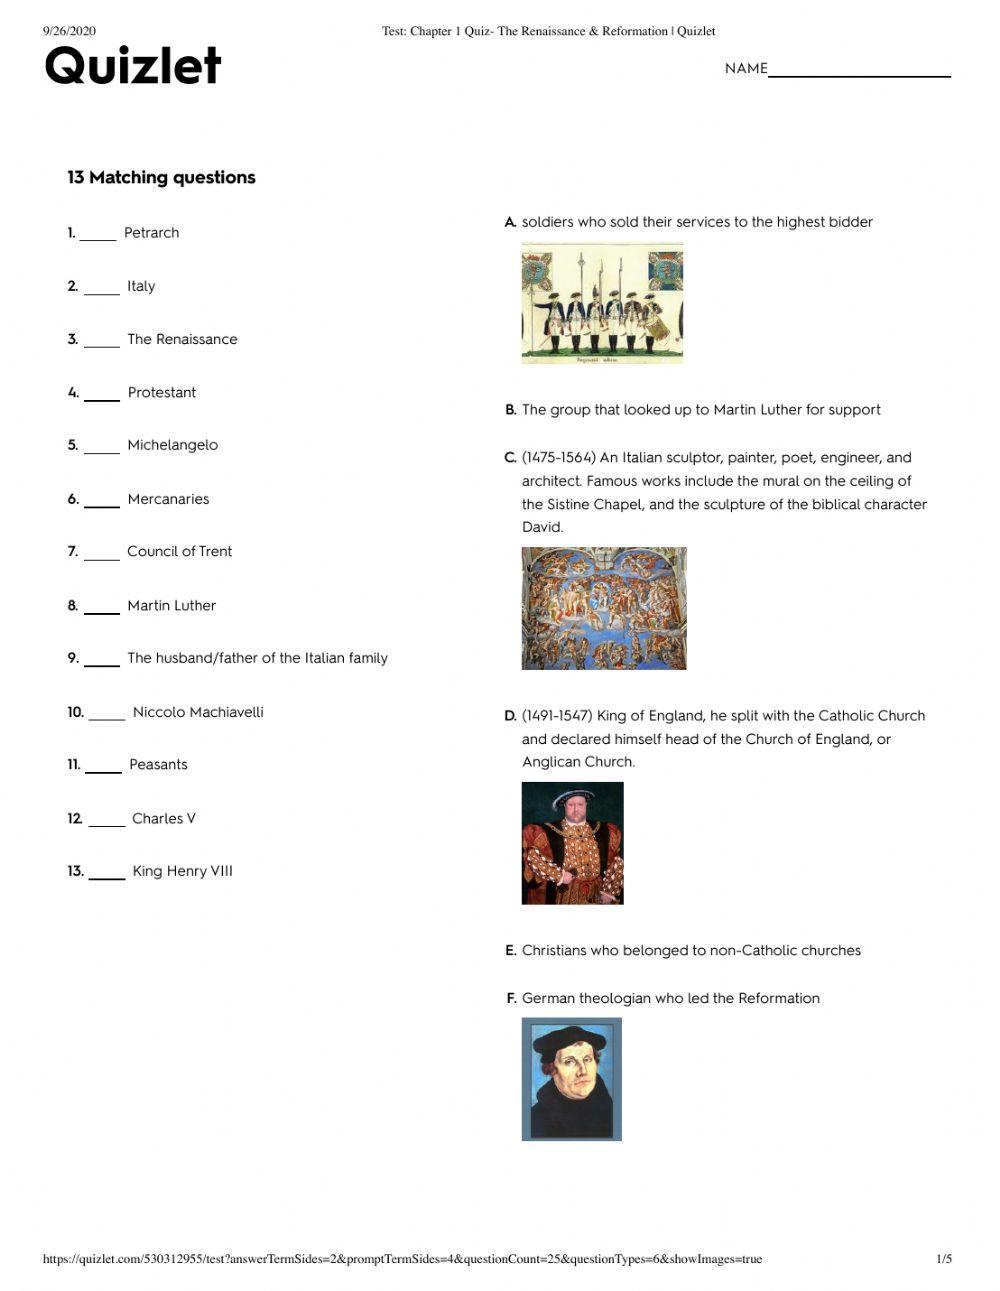 Chapter 1 Quiz- The Renaissance and Reformation